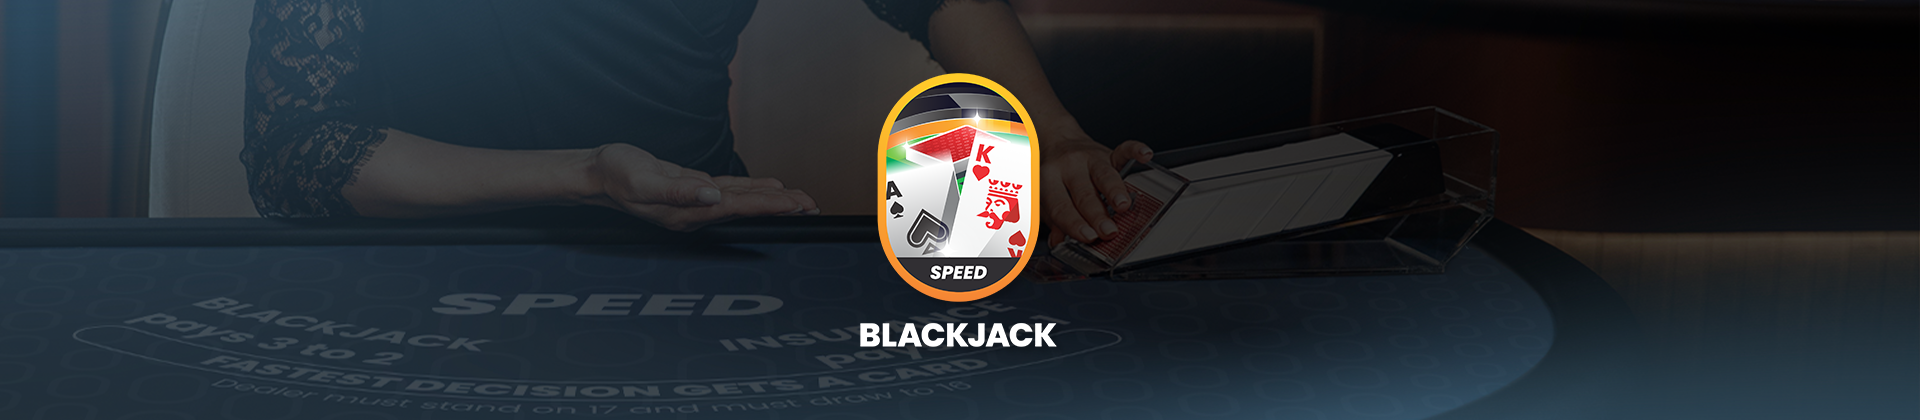 Banner featuring the Speed Blackjack logo in the centre, with a Blackjack table blurred in the background.